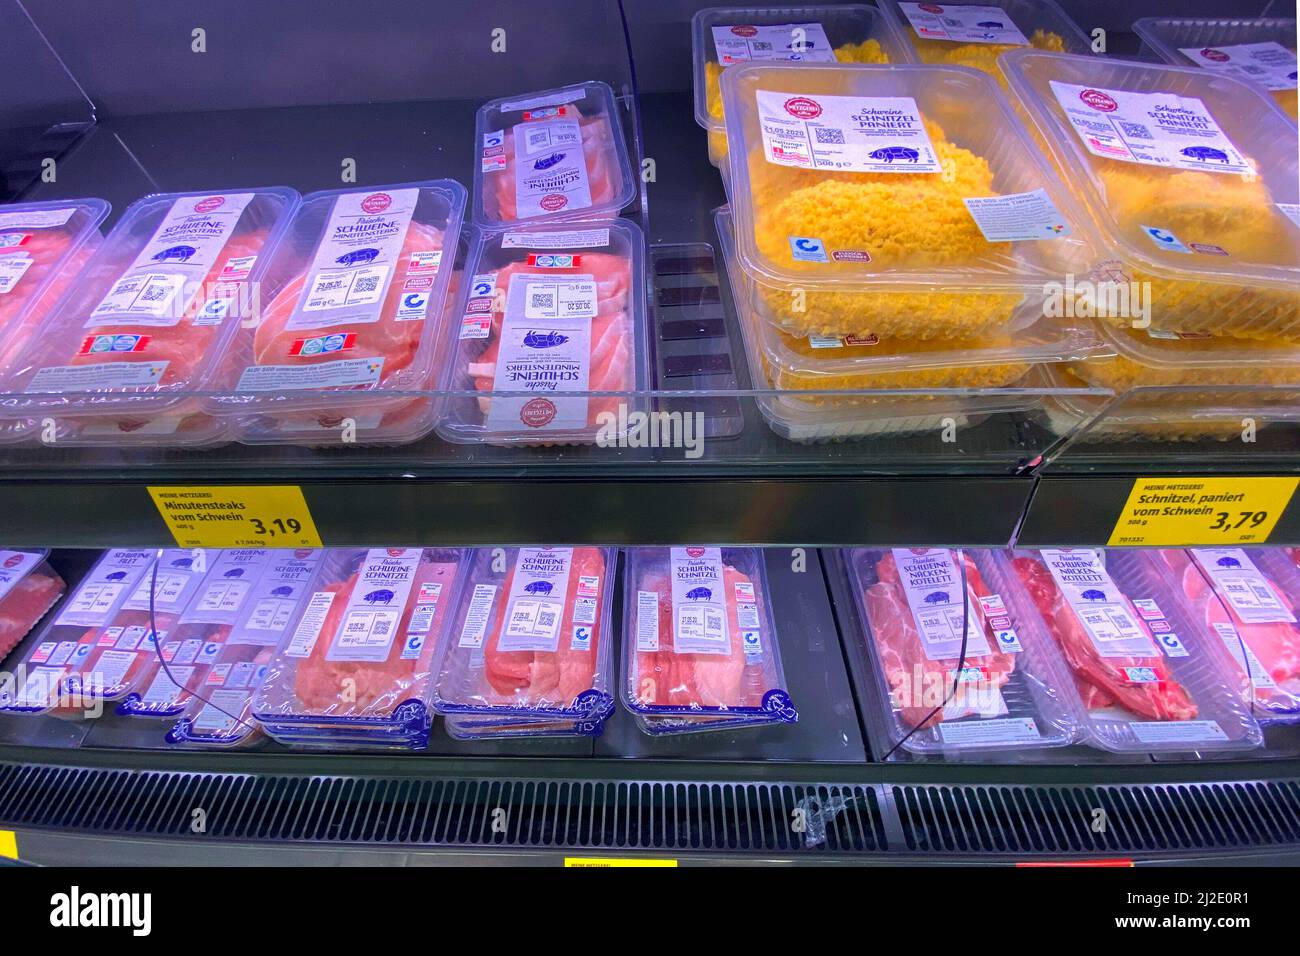 ARCHIVE PHOTO: Discounter ALDI will increase the prices for meat and milk products again from April 2nd, 2022. Despite abuses in the meat industry, Aldi wants to lower meat prices. View of a refrigerated shelf with packaged meat welded in foil from the discounter ALDI on May 20th, 2020. Stock Photo